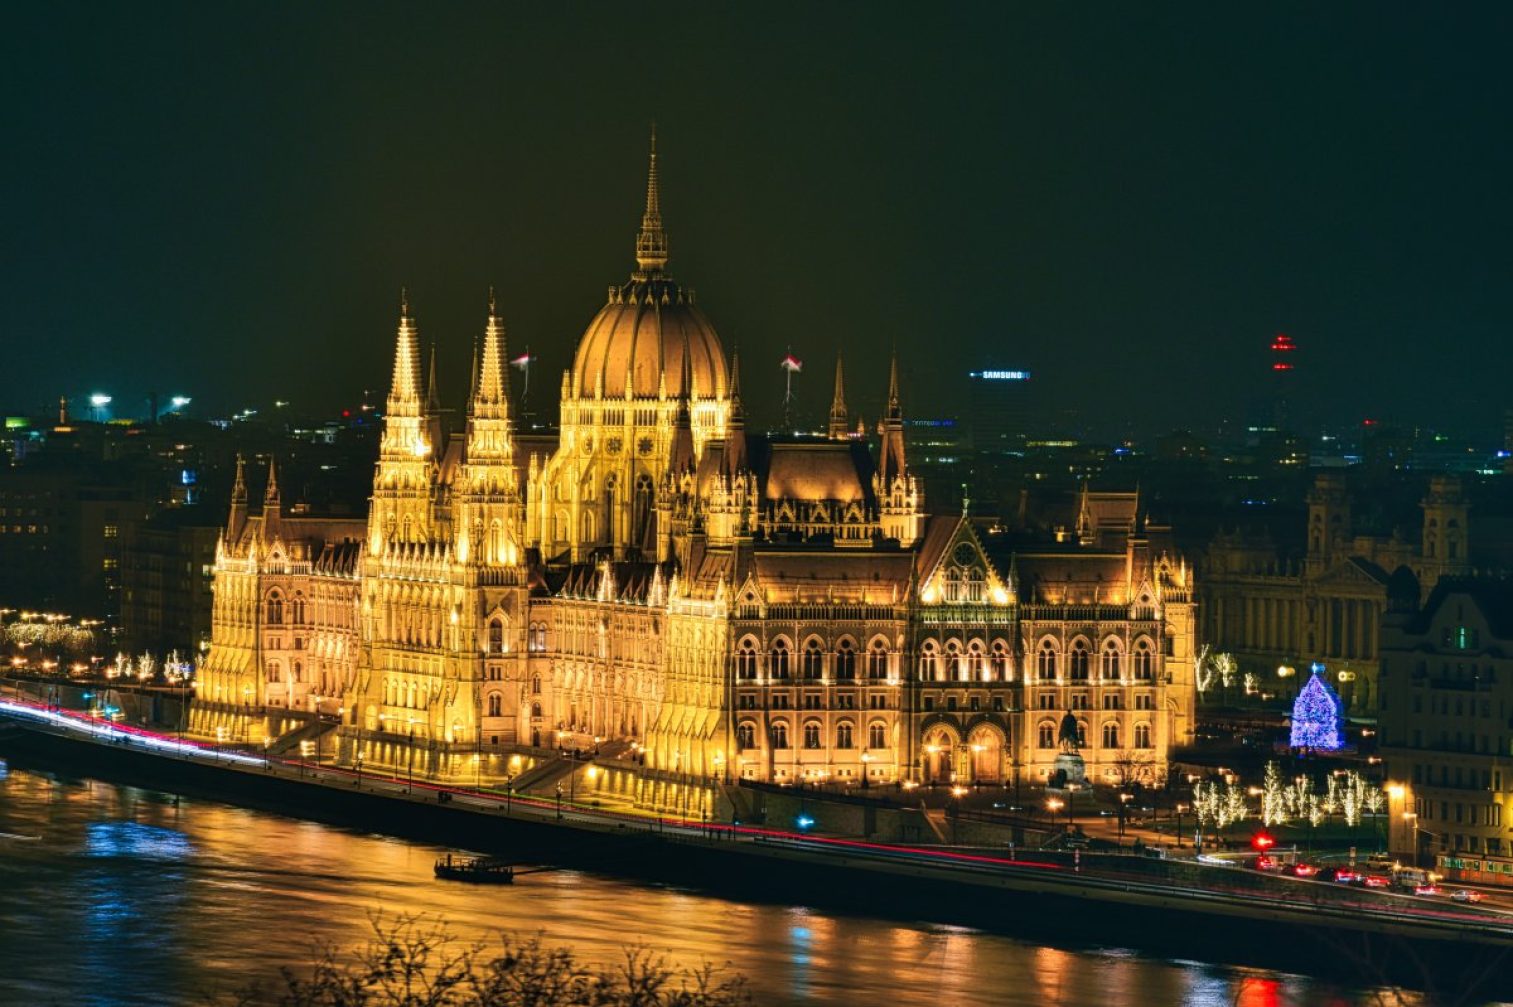 The hungarian parliament building